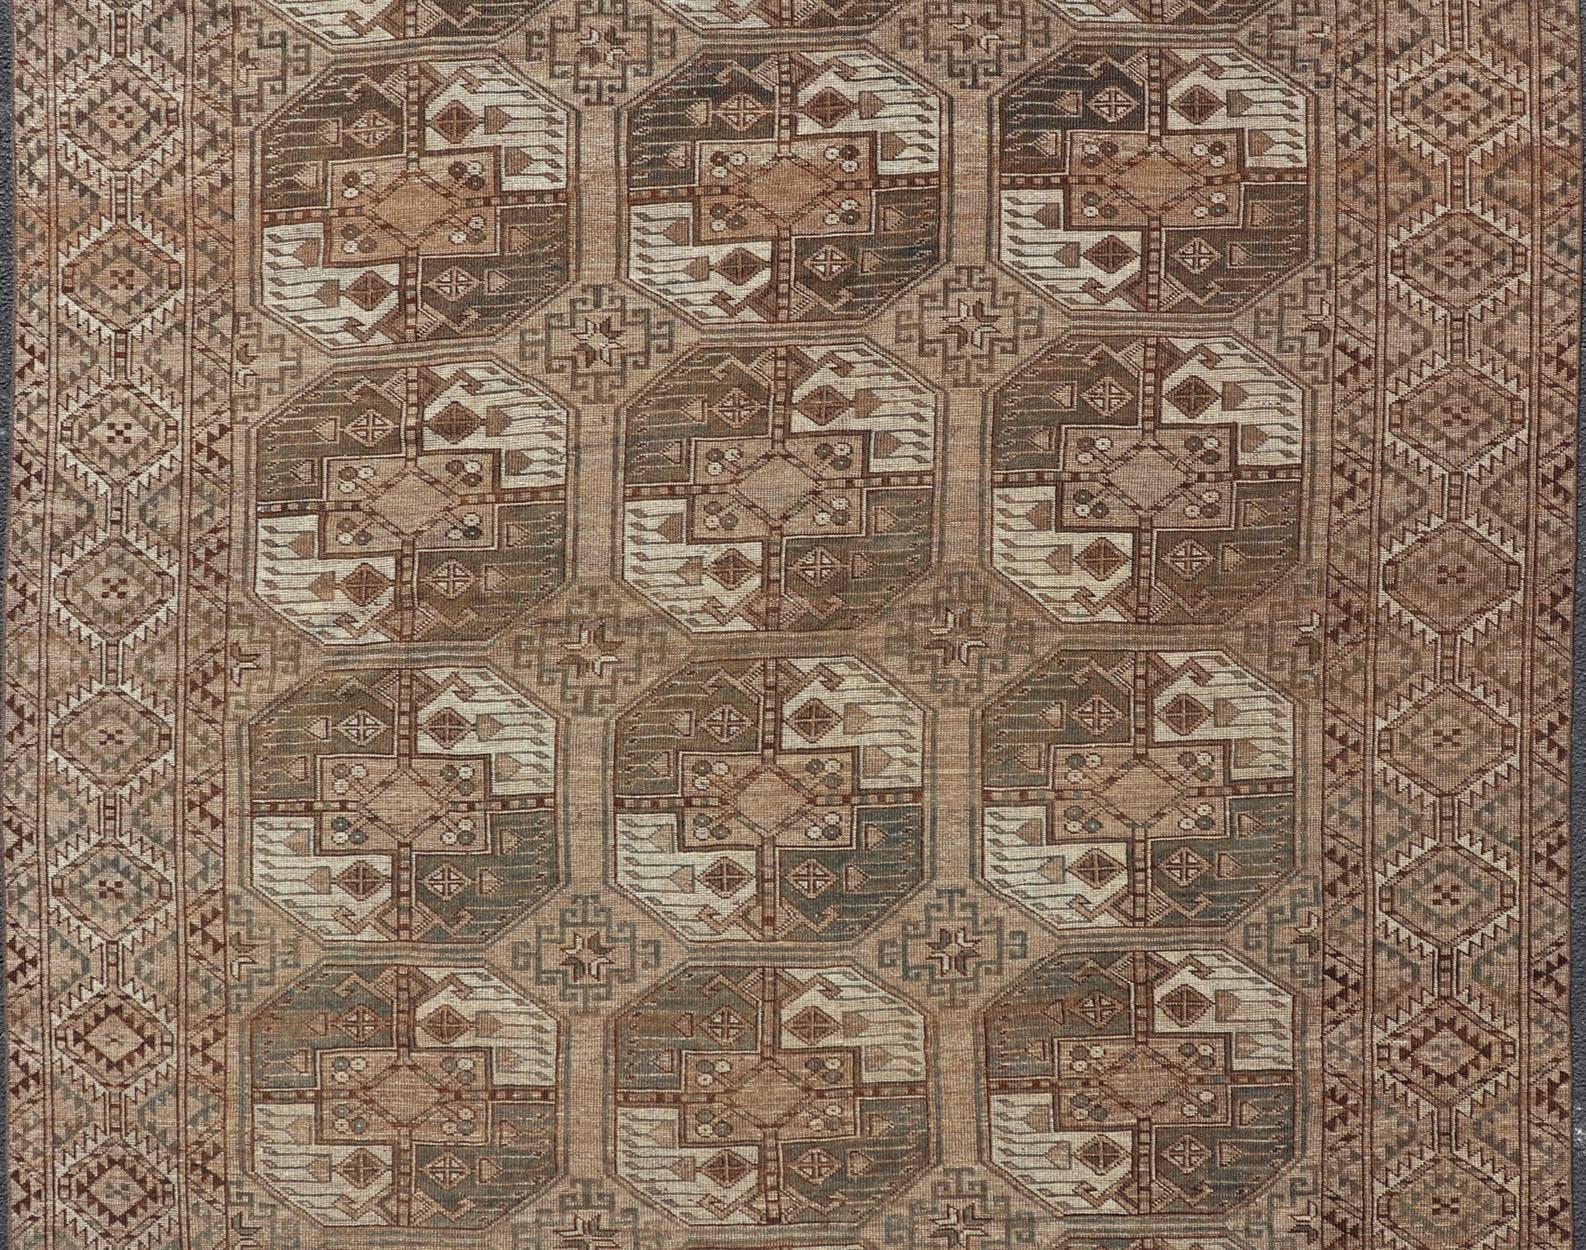 Hand-Knotted Turkomen Ersari Rug in Wool with All-Over Sub-Geometric Gul Design In Good Condition For Sale In Atlanta, GA